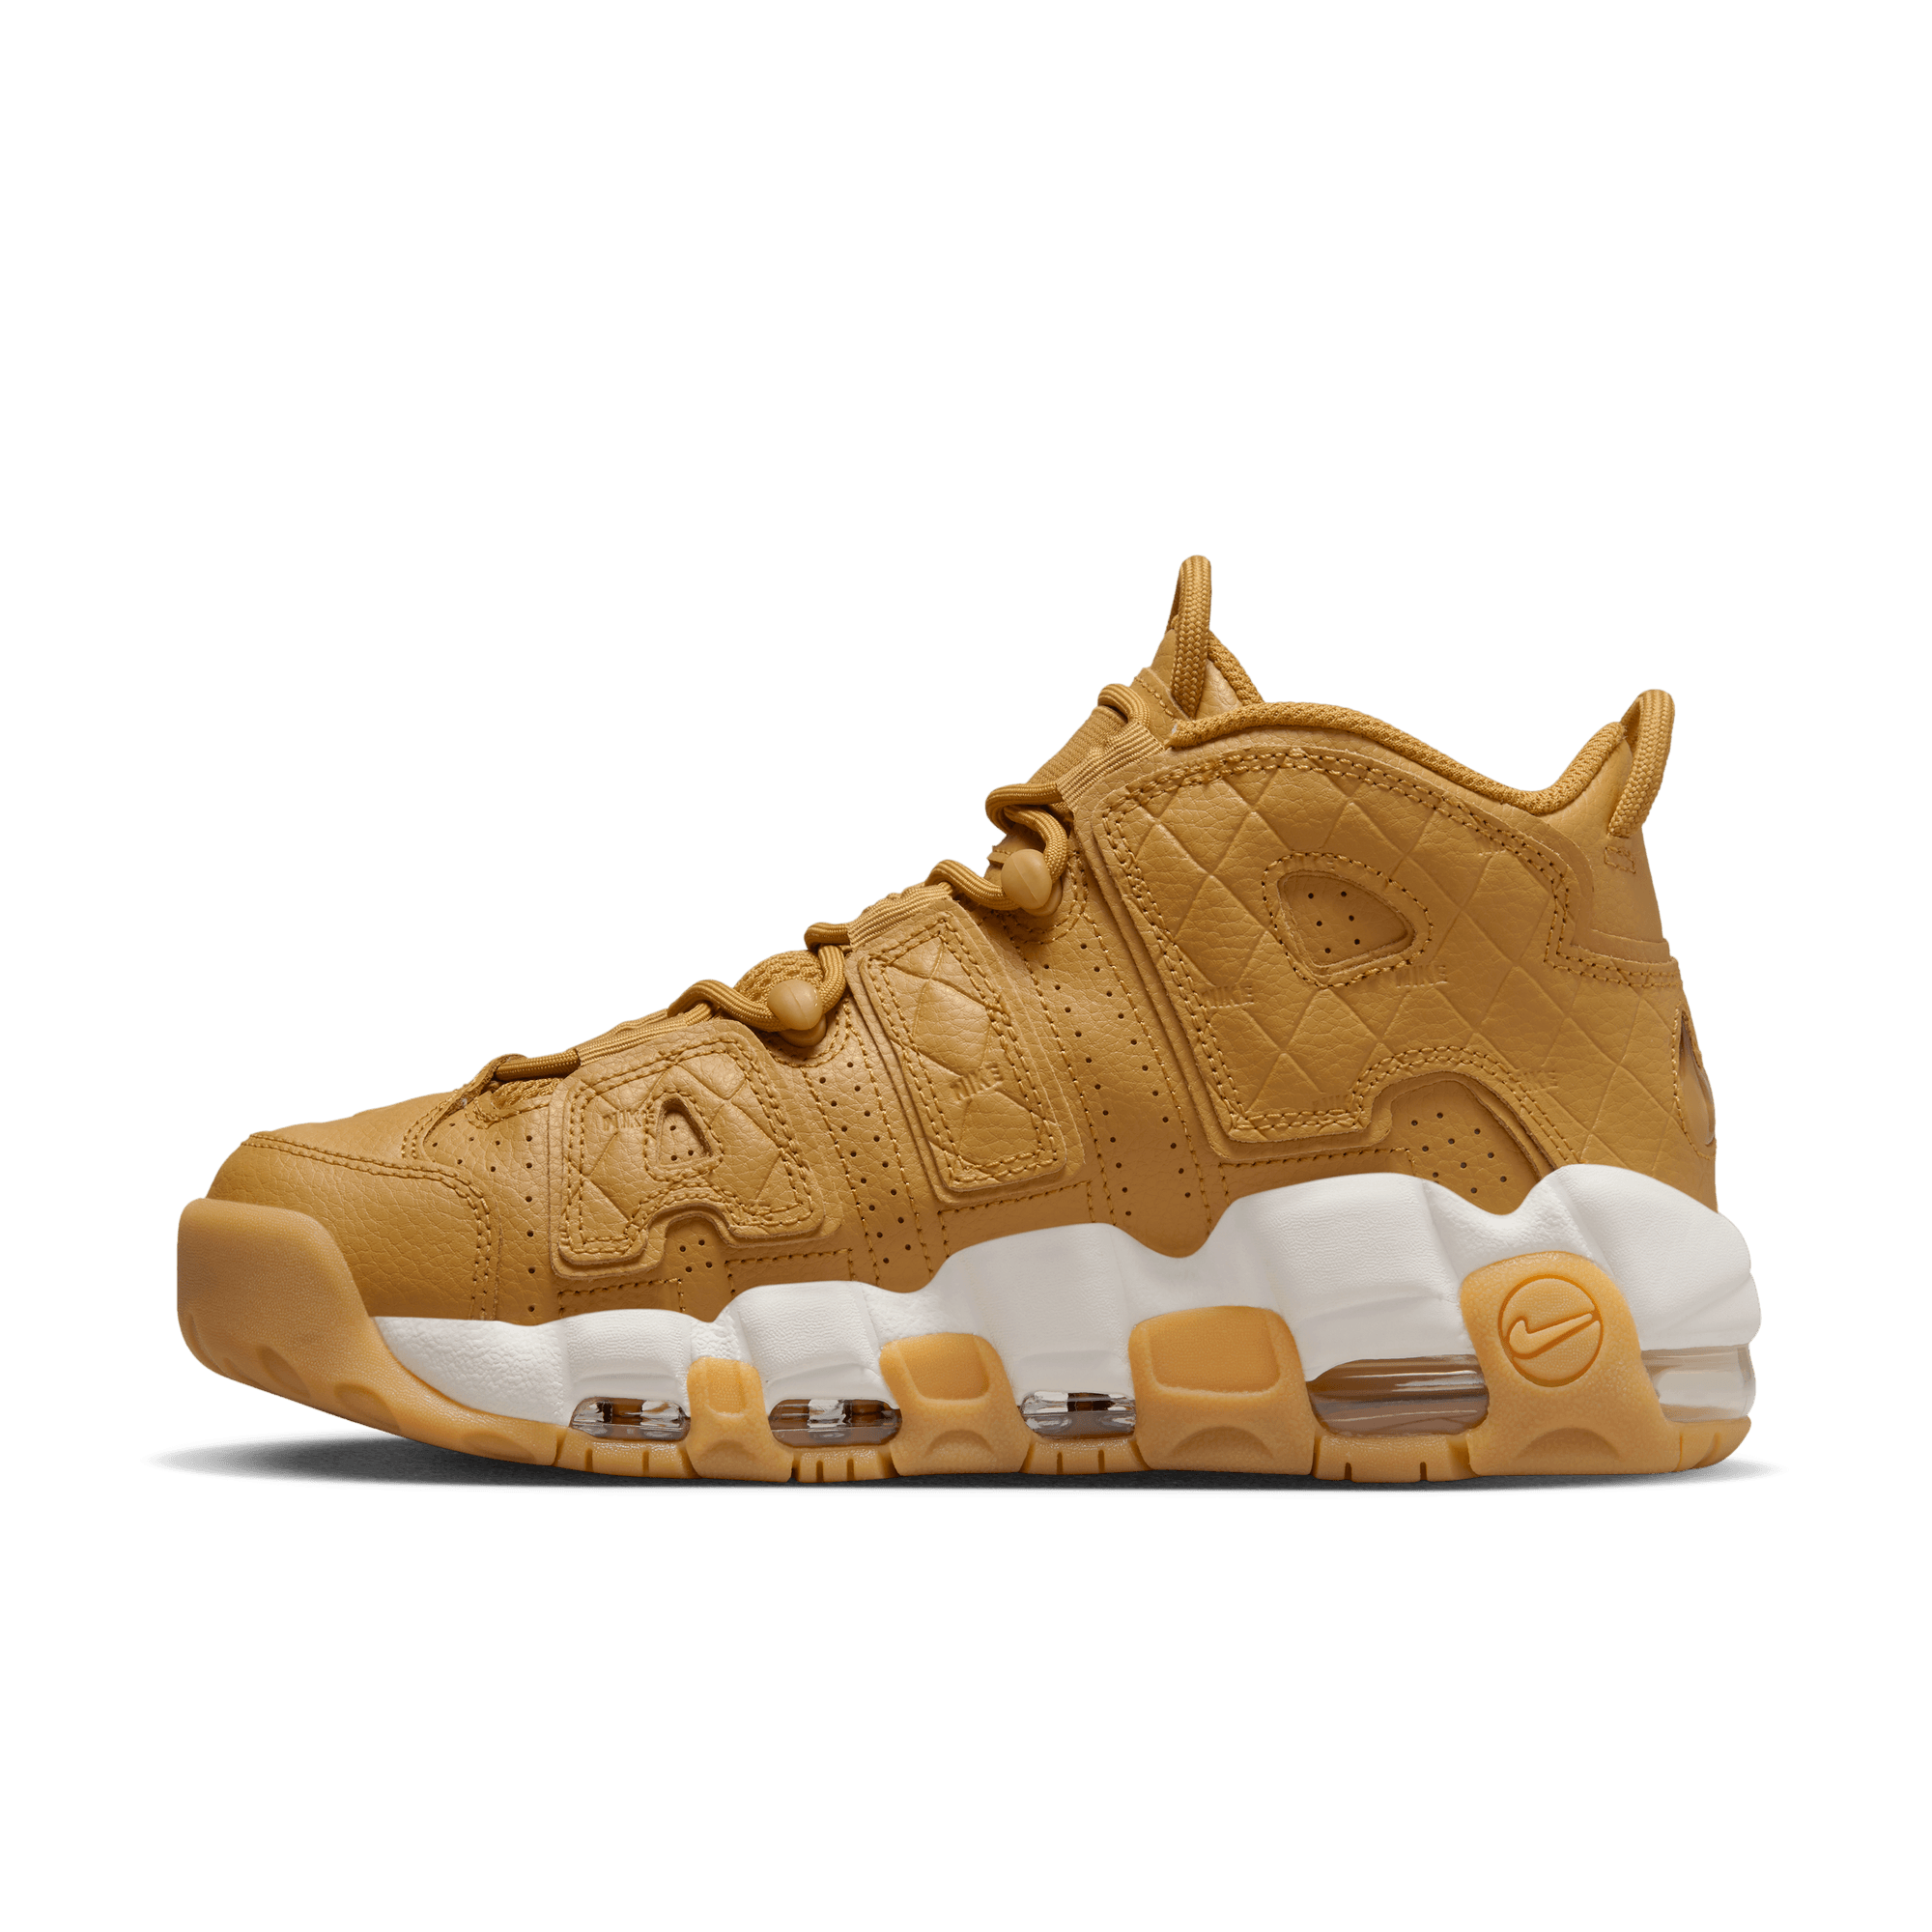 Nike Women's Air More Uptempo Shoes